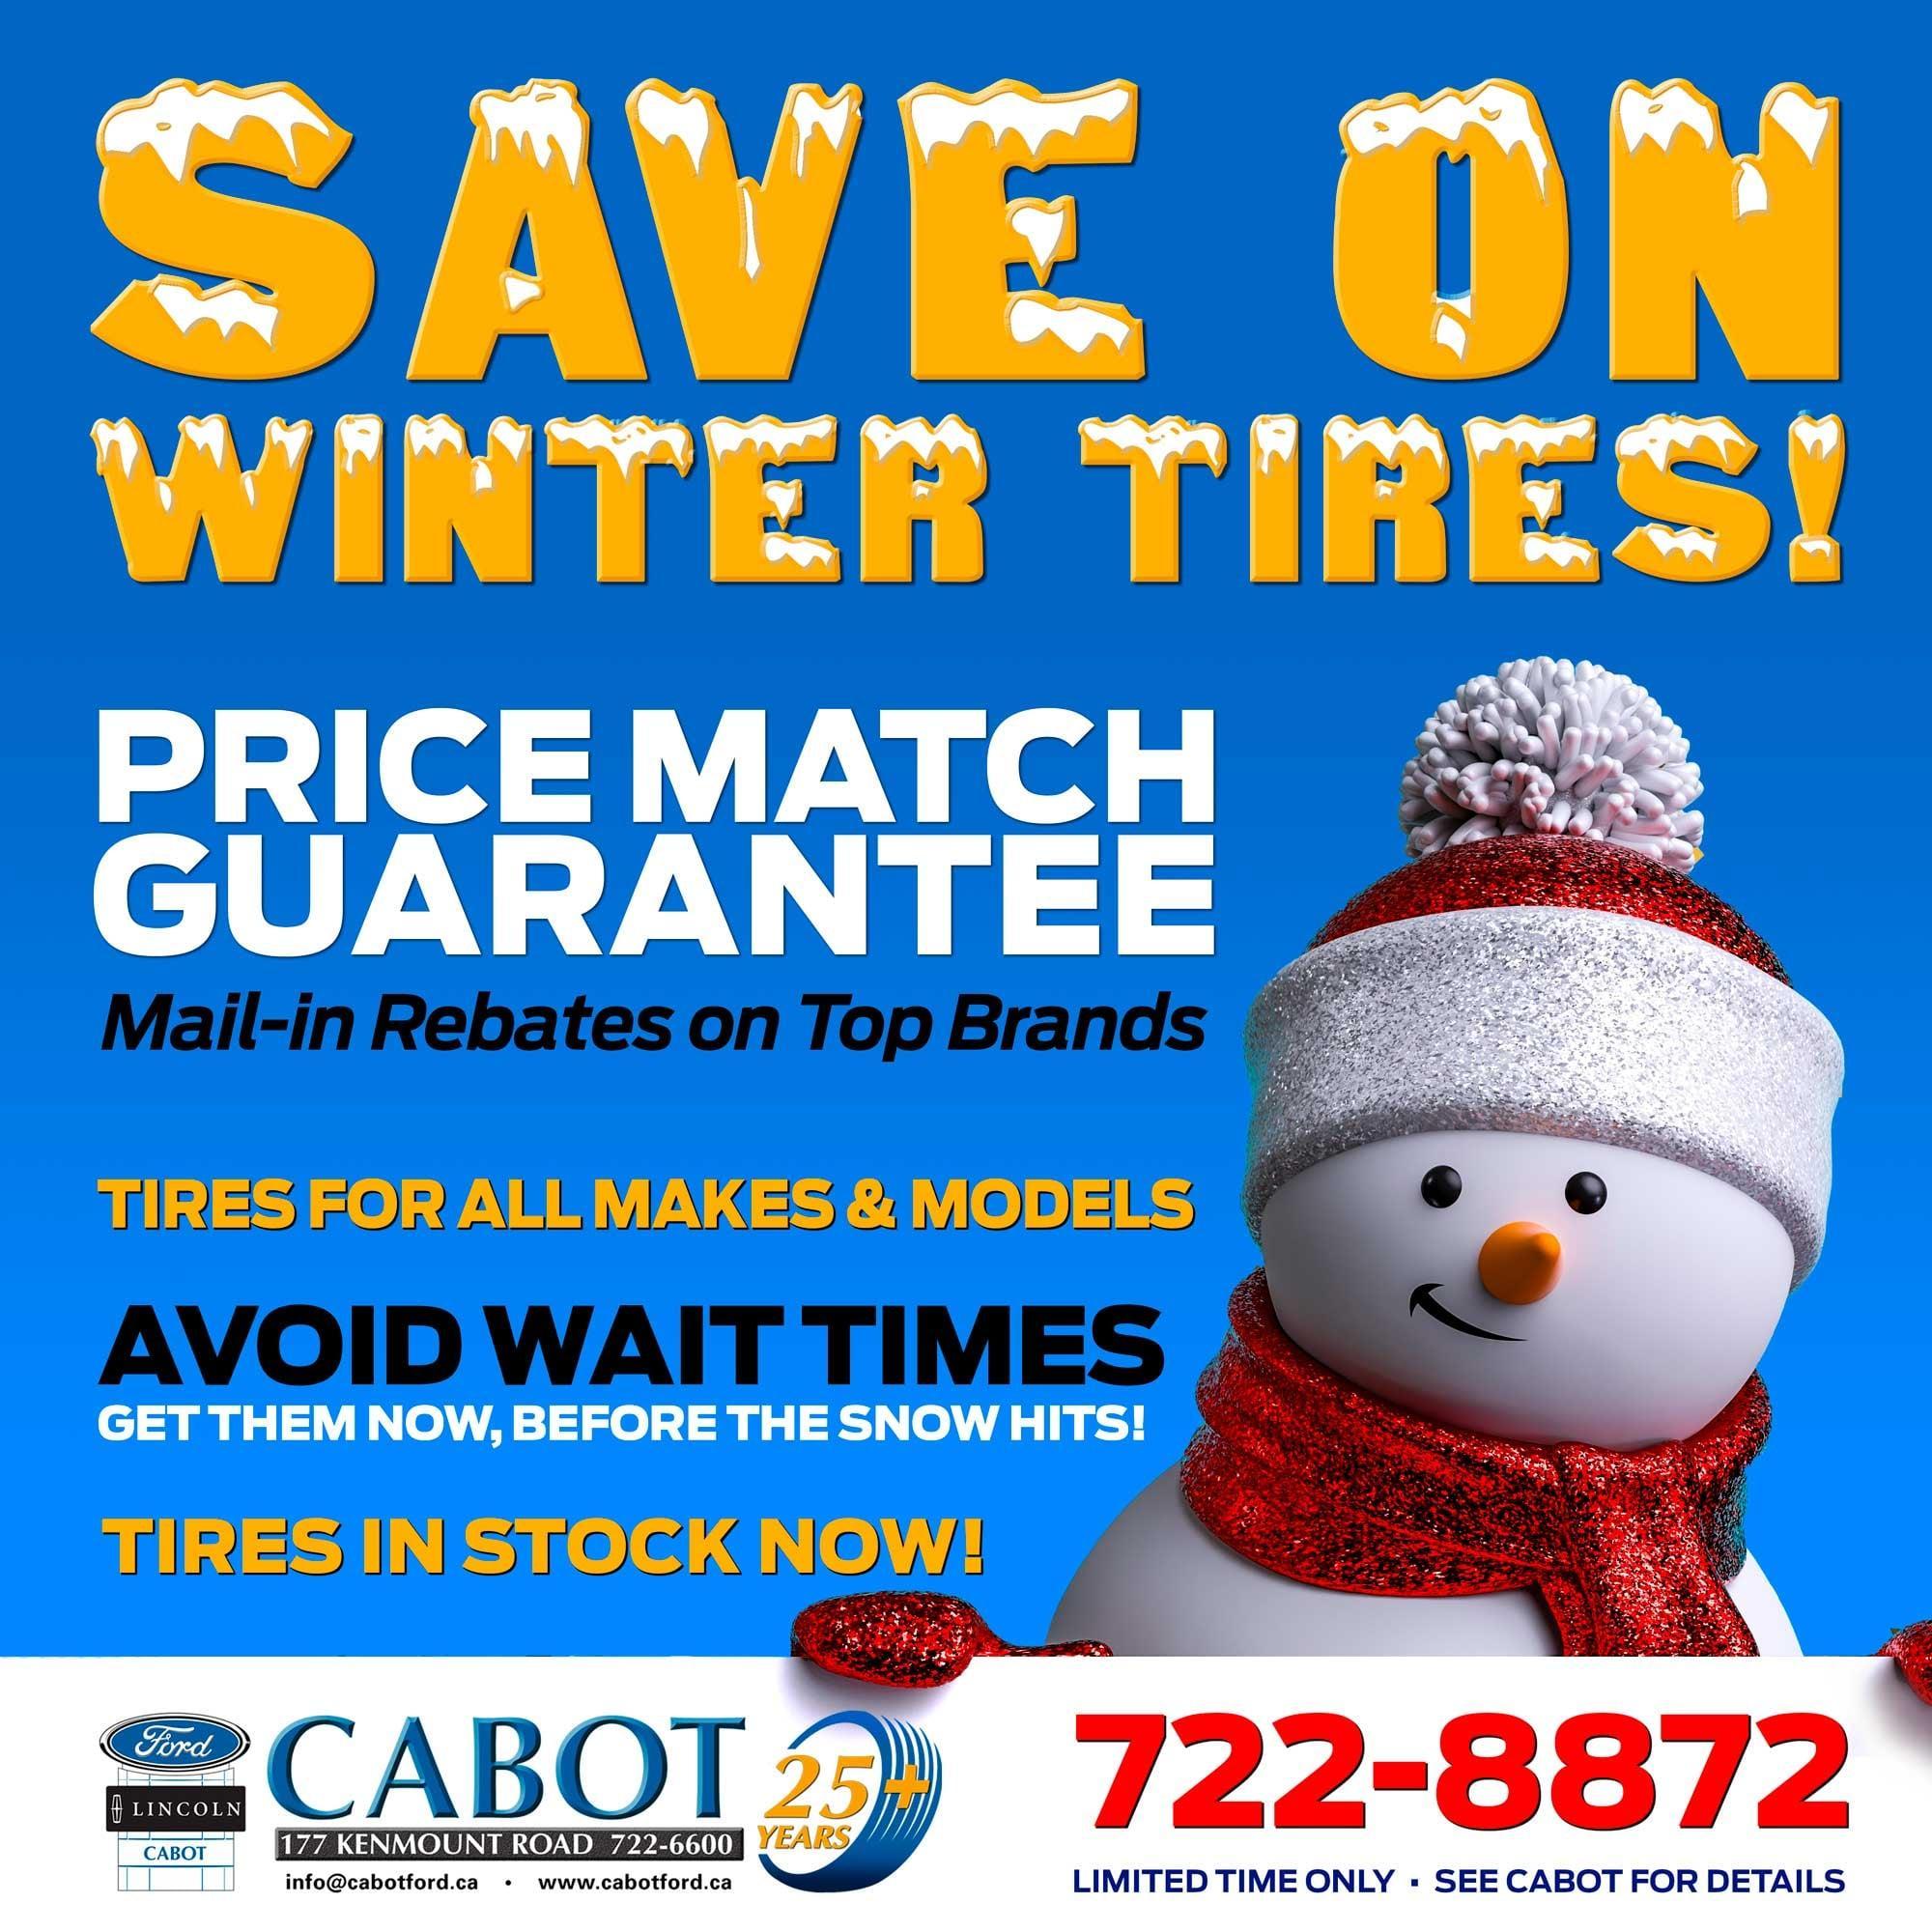 Save on winter tires, price match guarantee! Get them now before the snow hits!